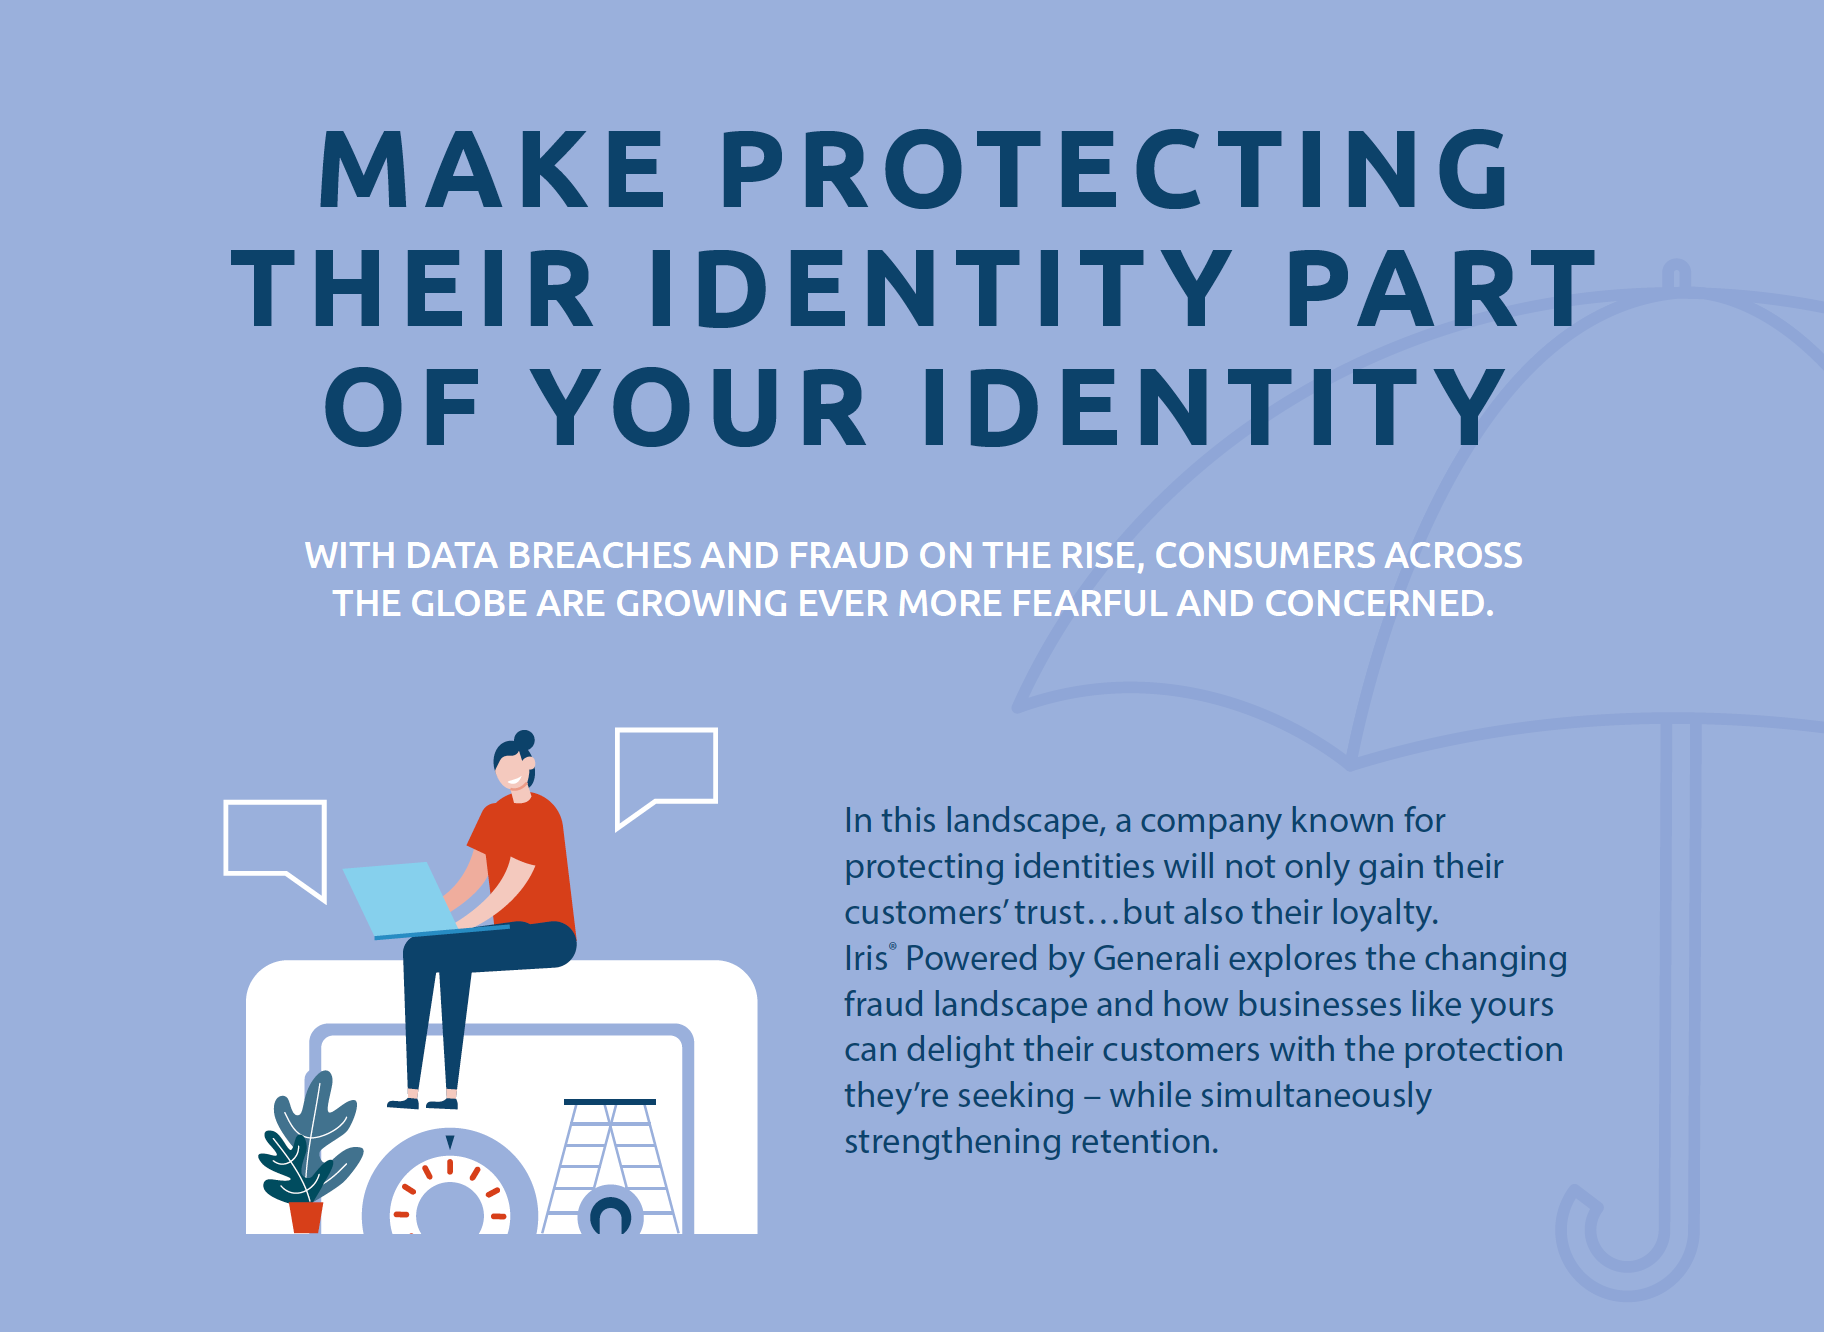 Make Protecting Their Identity Part of Your Identity